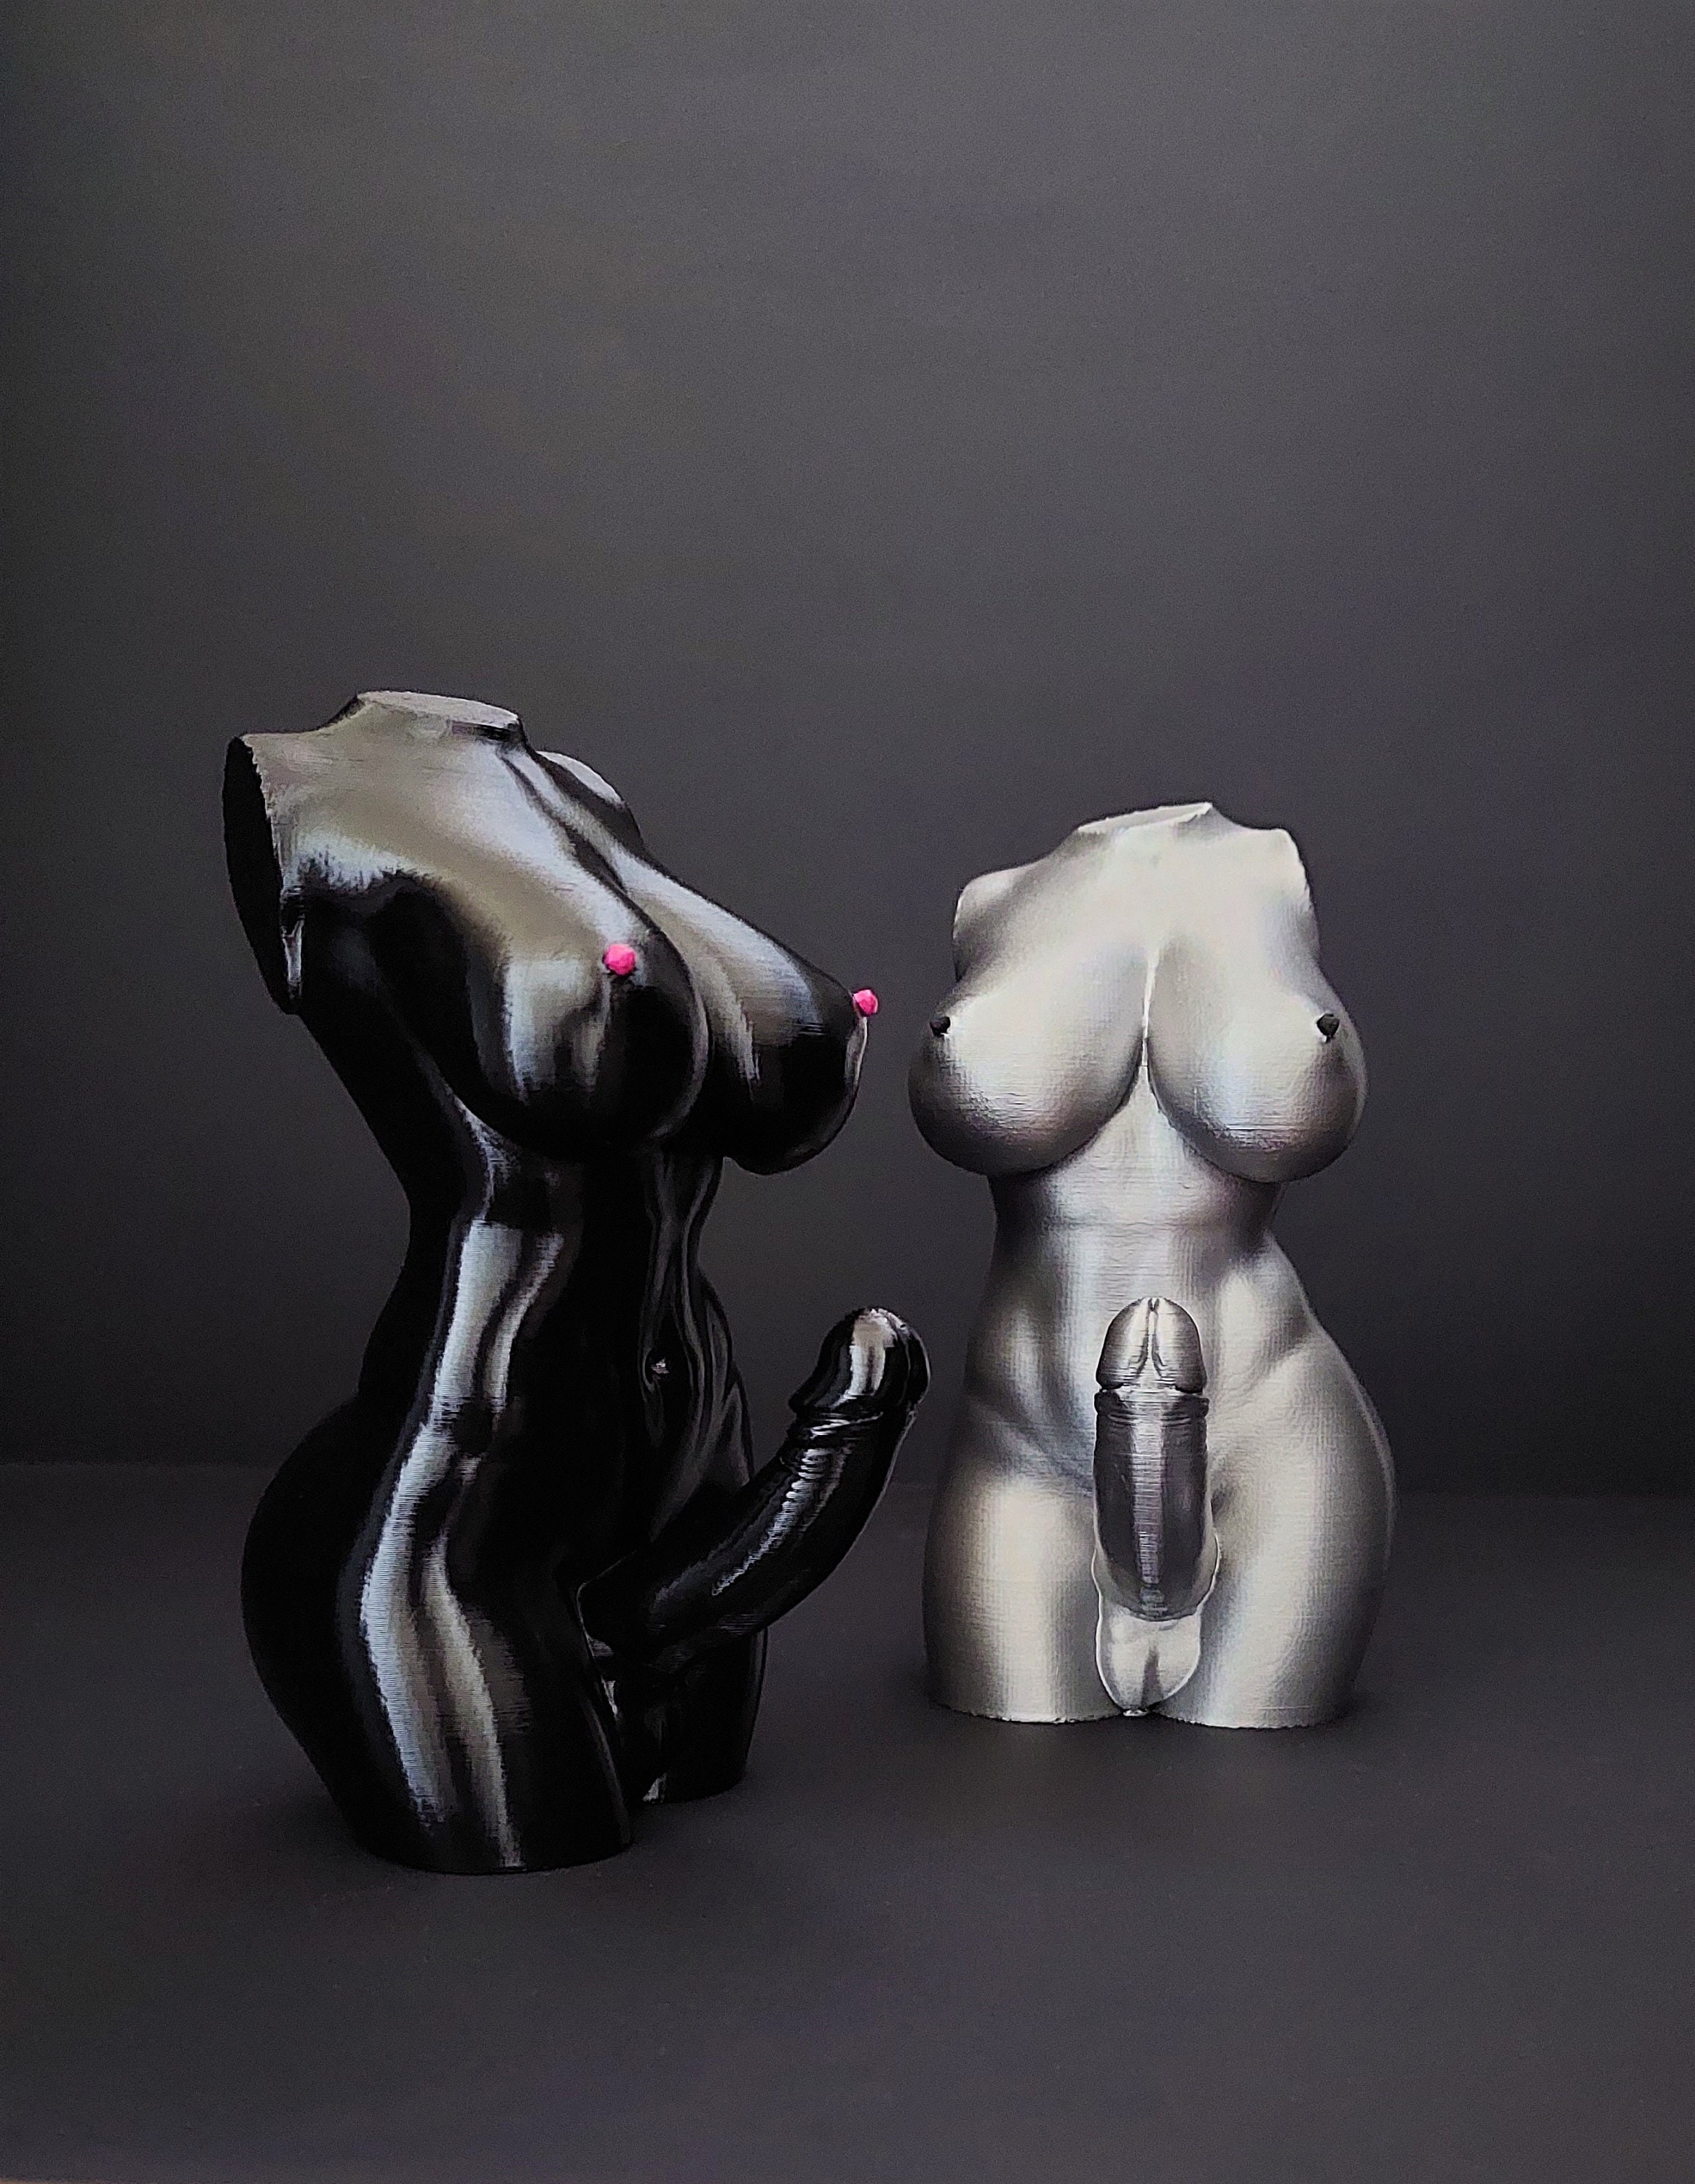 Sex Change Before After Nude - 6.3 Inch Transgender Body Art Sculpture Nude Female Male - Etsy